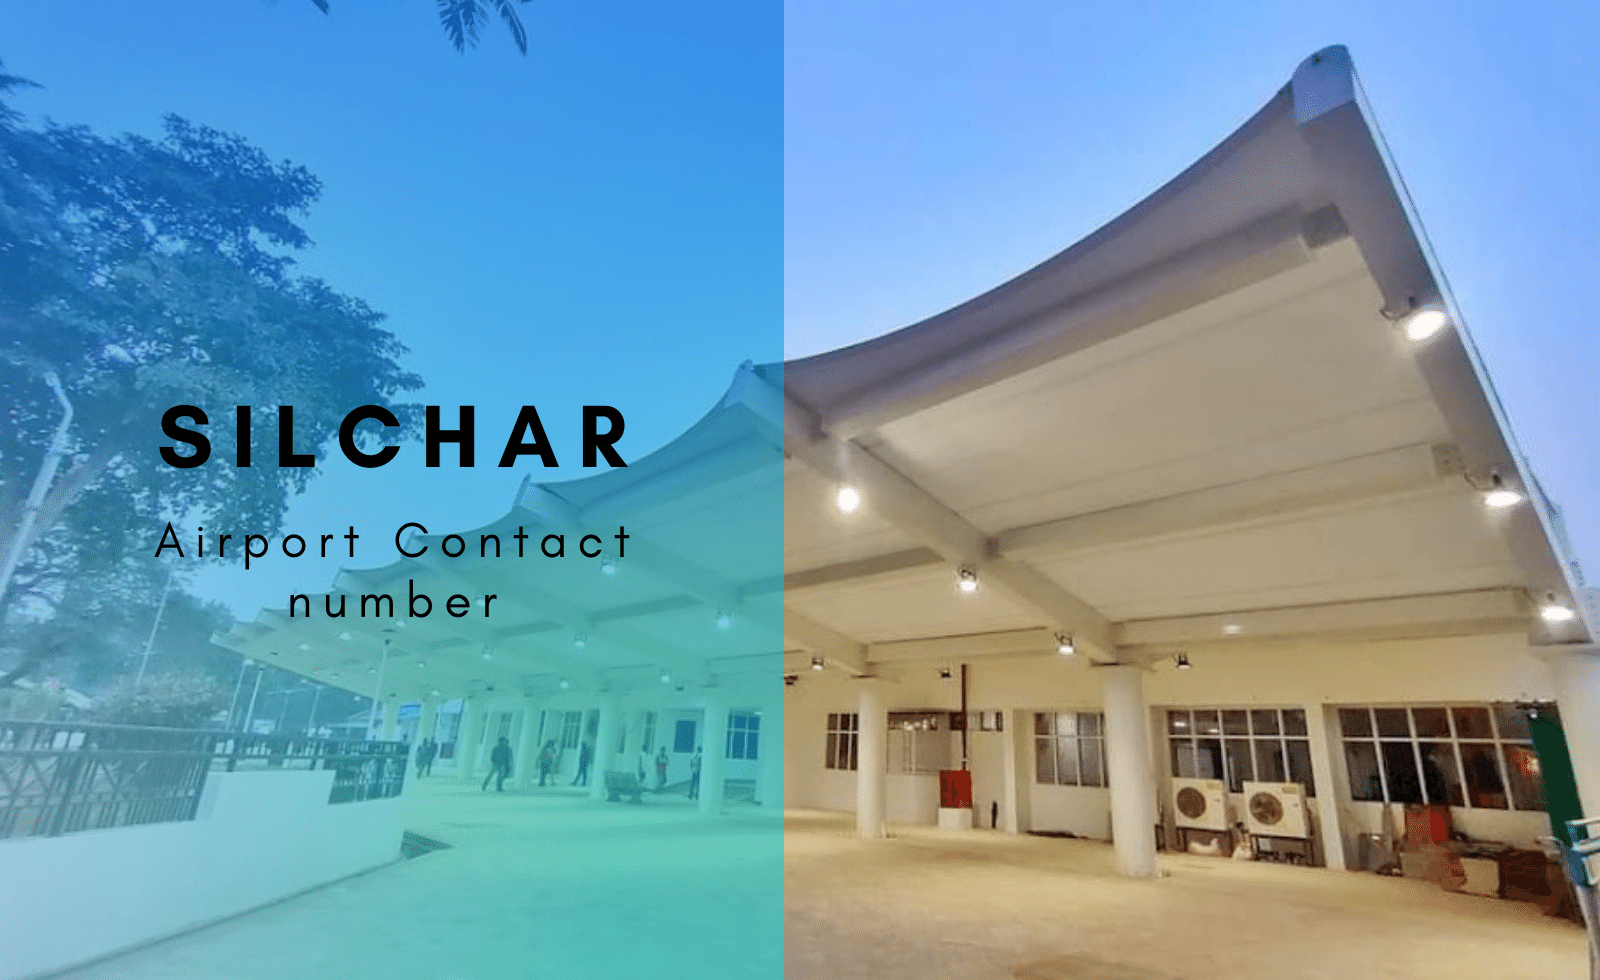 Silchar airport contact number